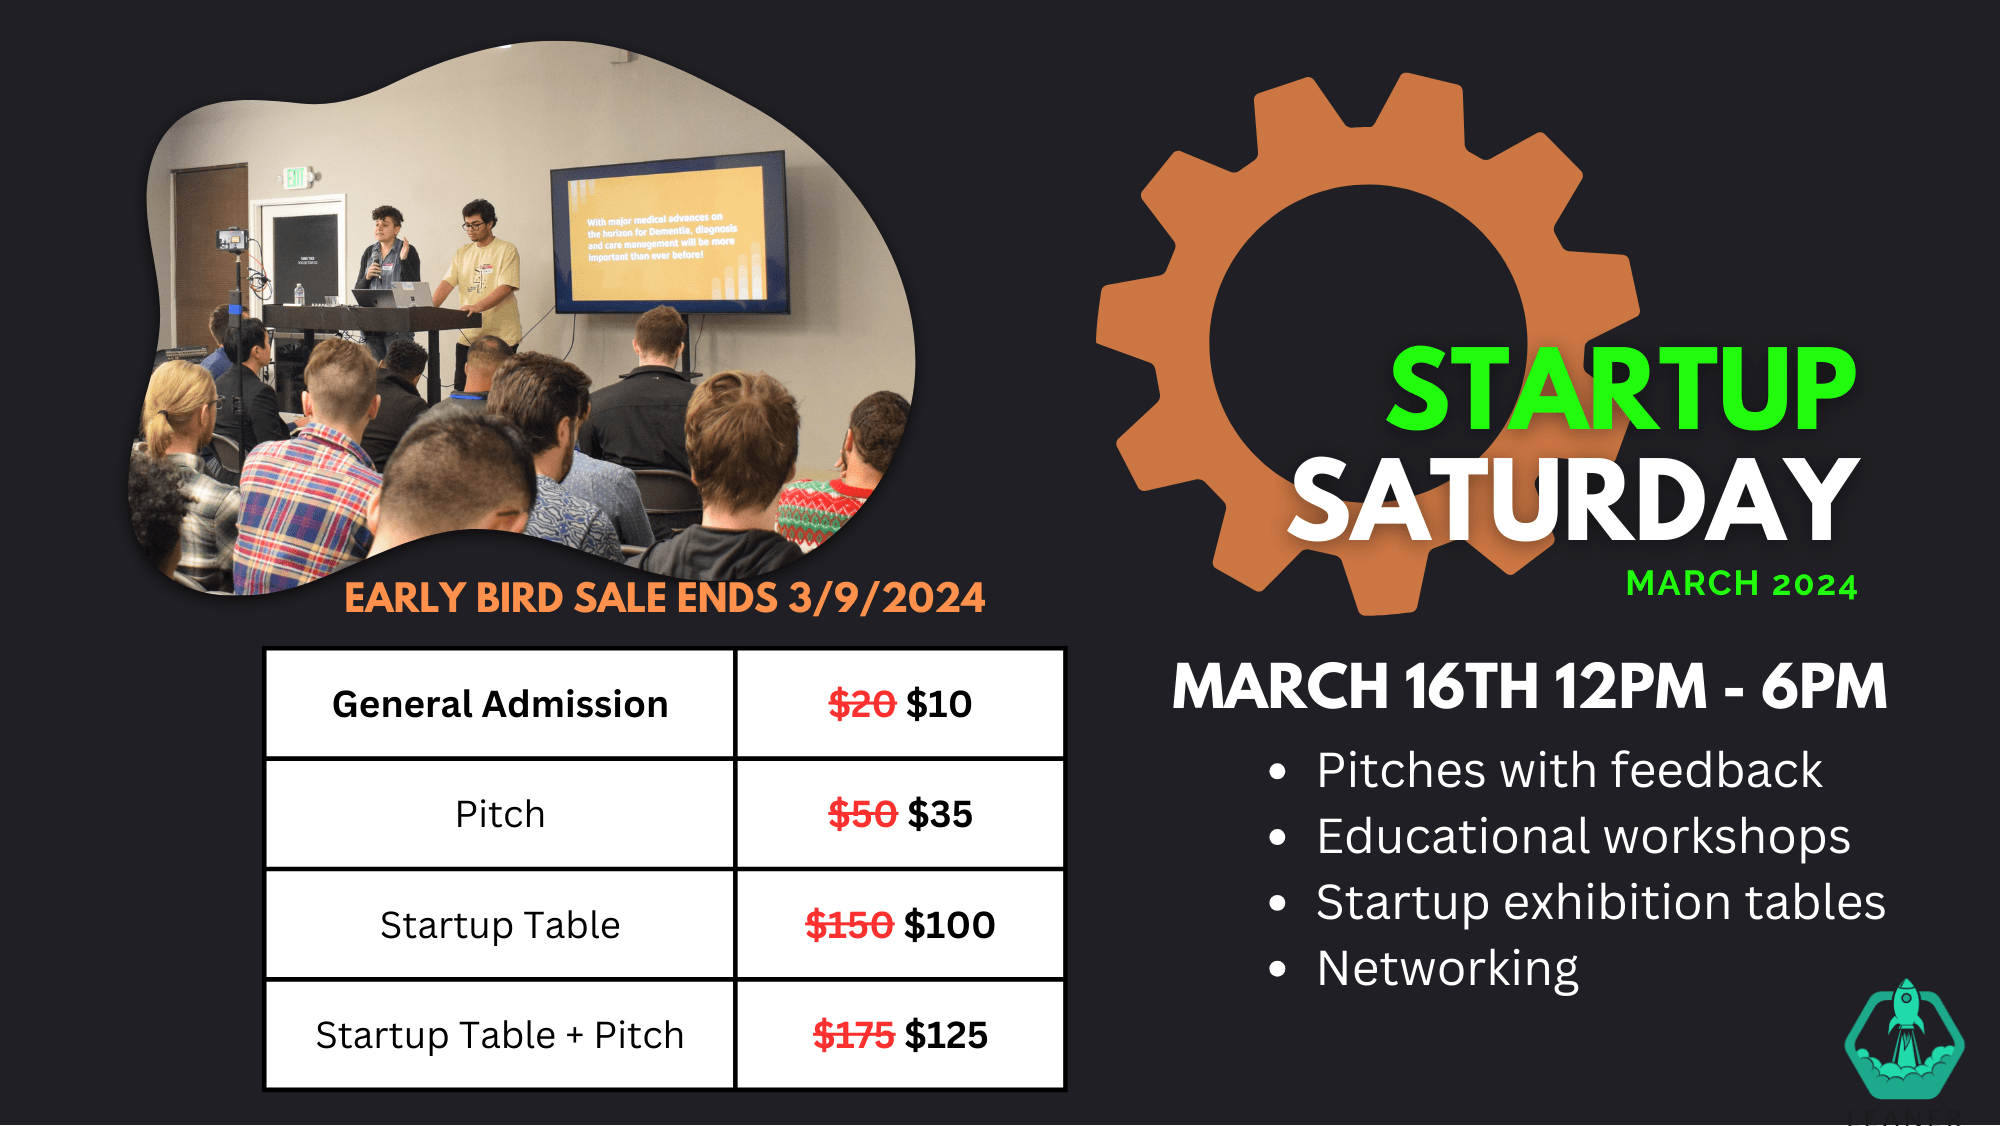 Startup Saturday March 2024 Event Image